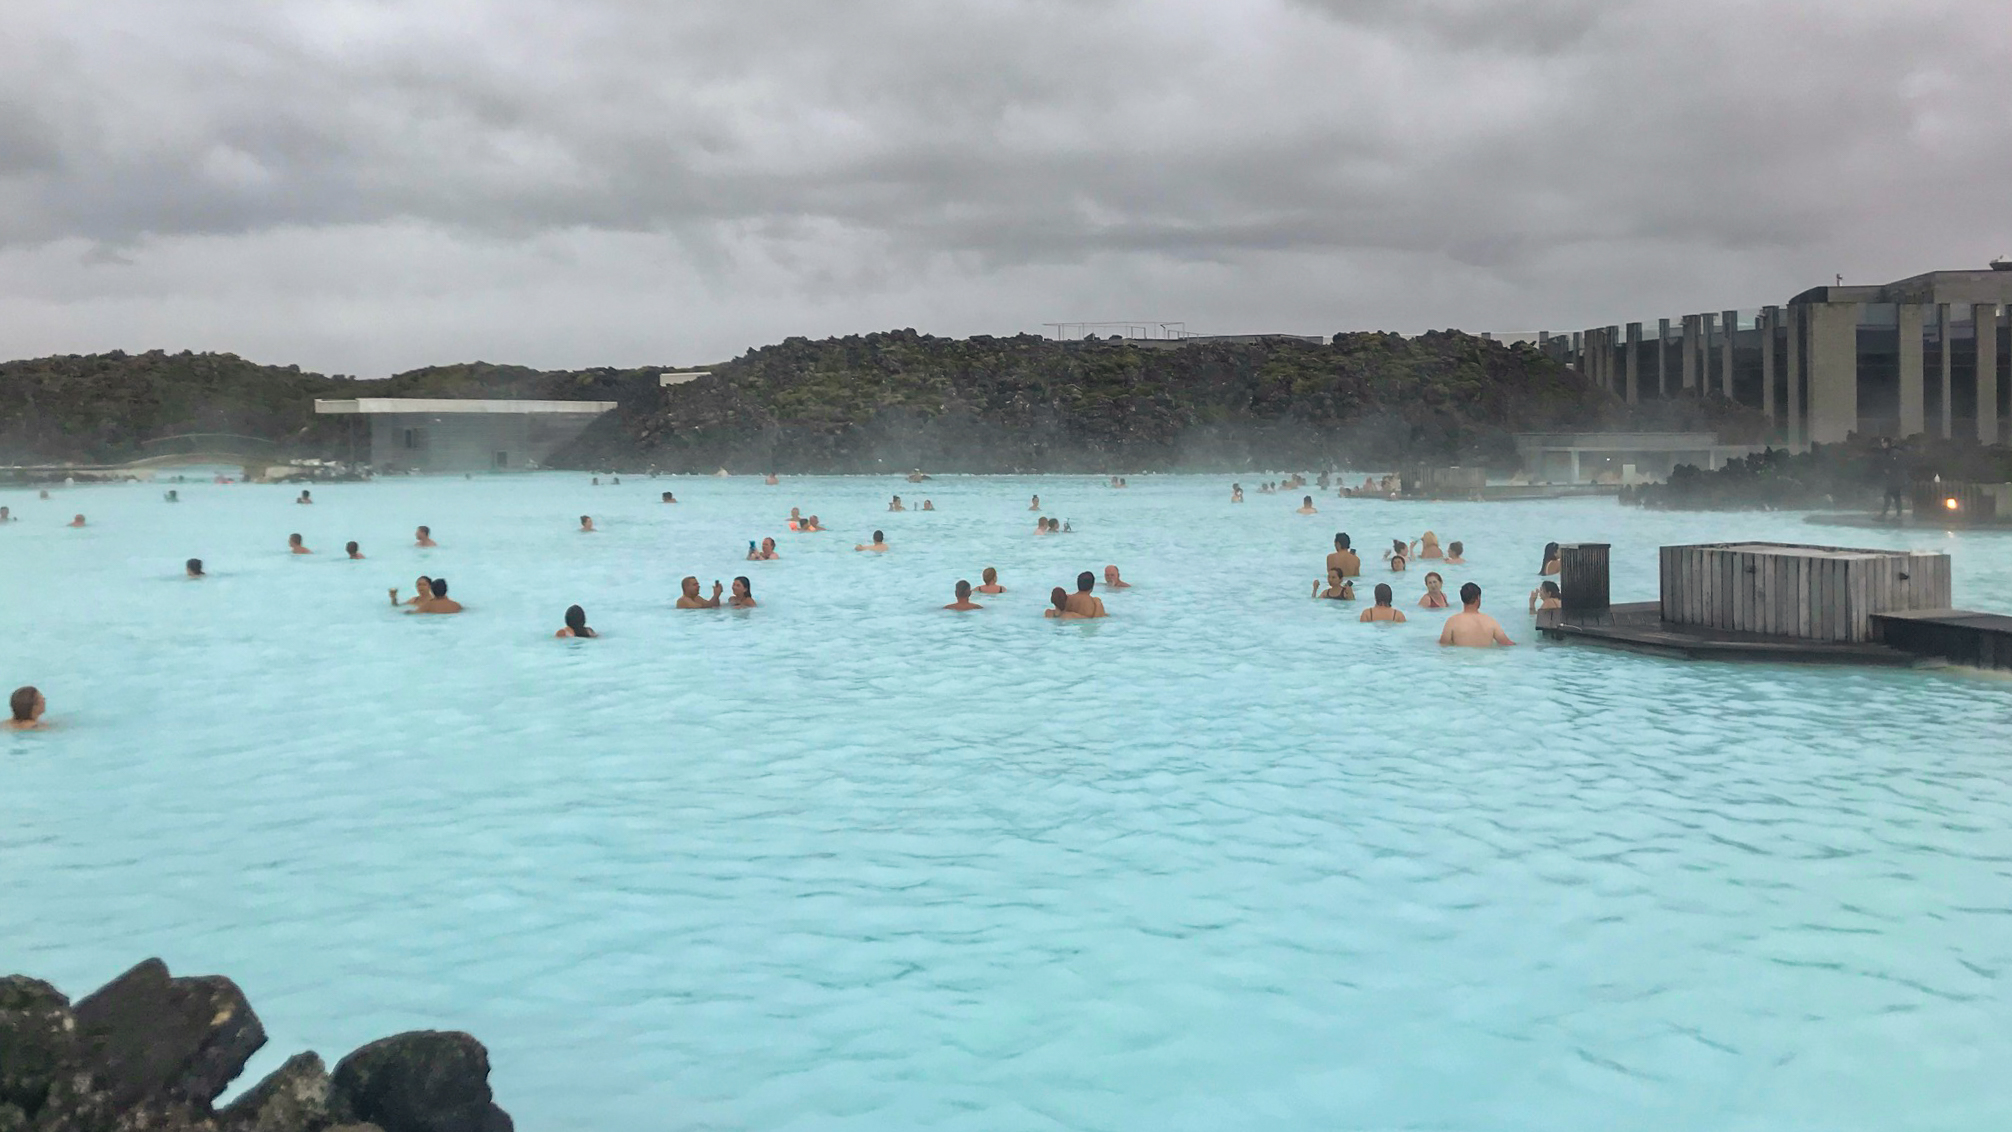 Pool area at the Blue Lagoon in Iceland